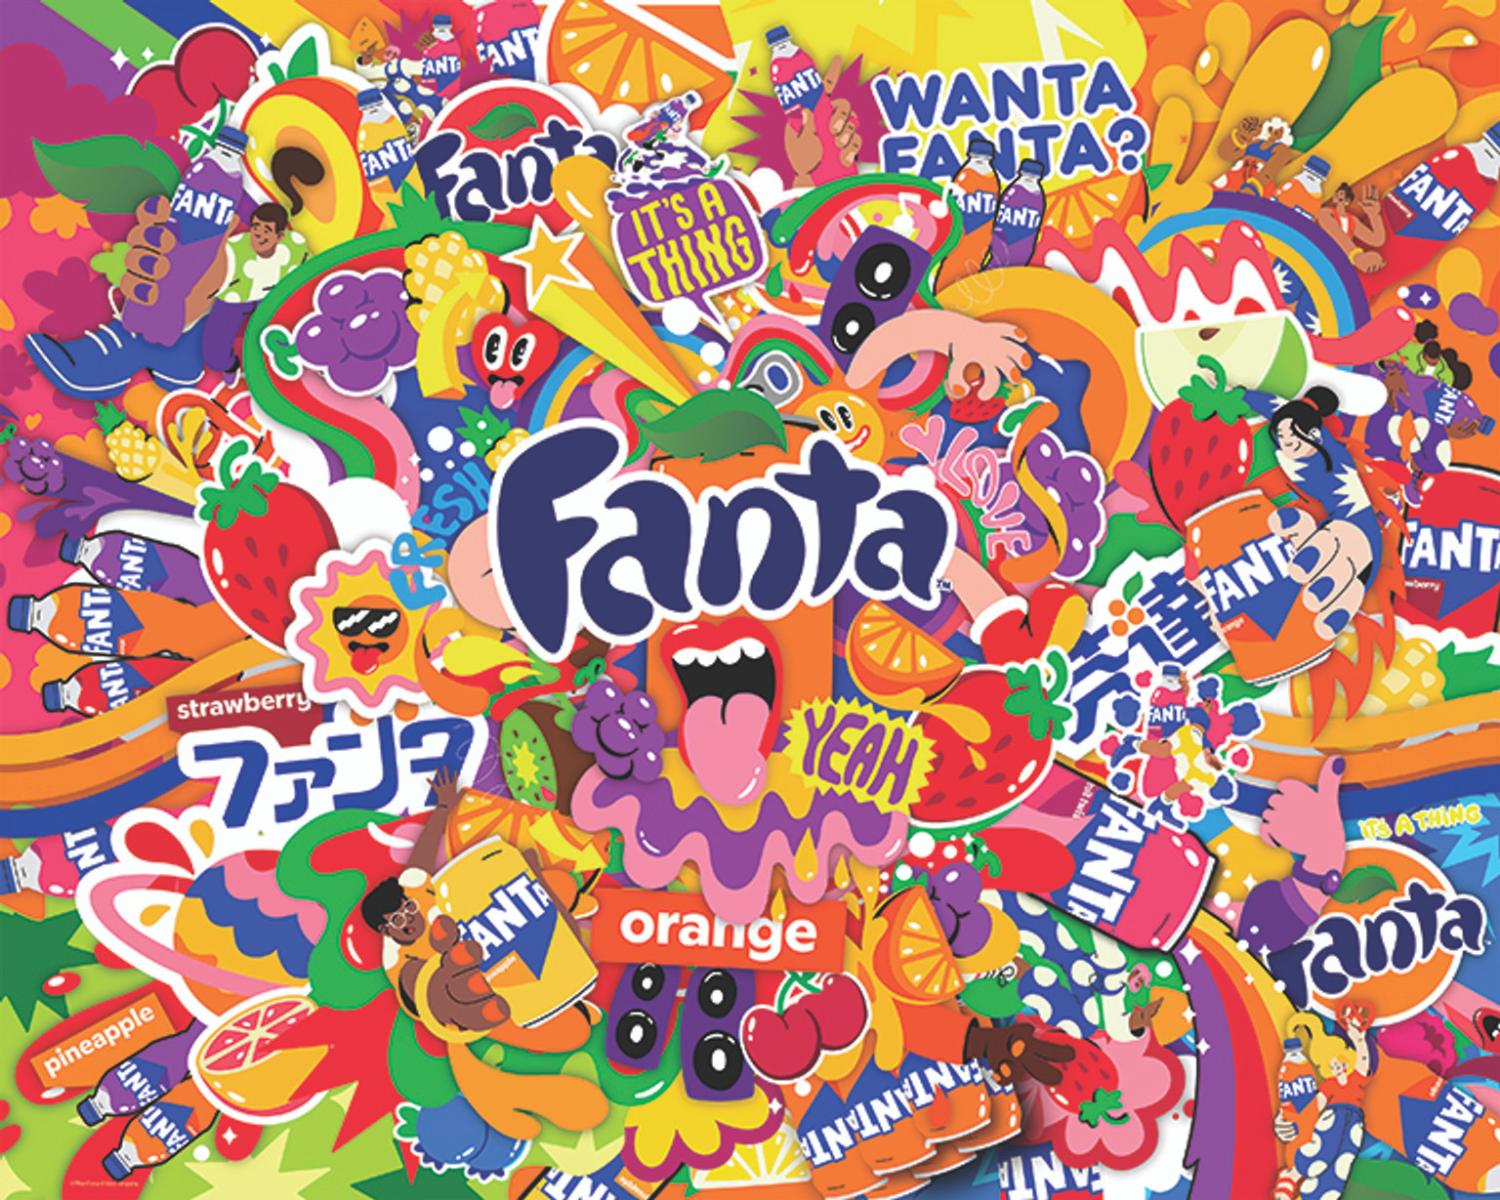 Fantastical Food and Drink Jigsaw Puzzle